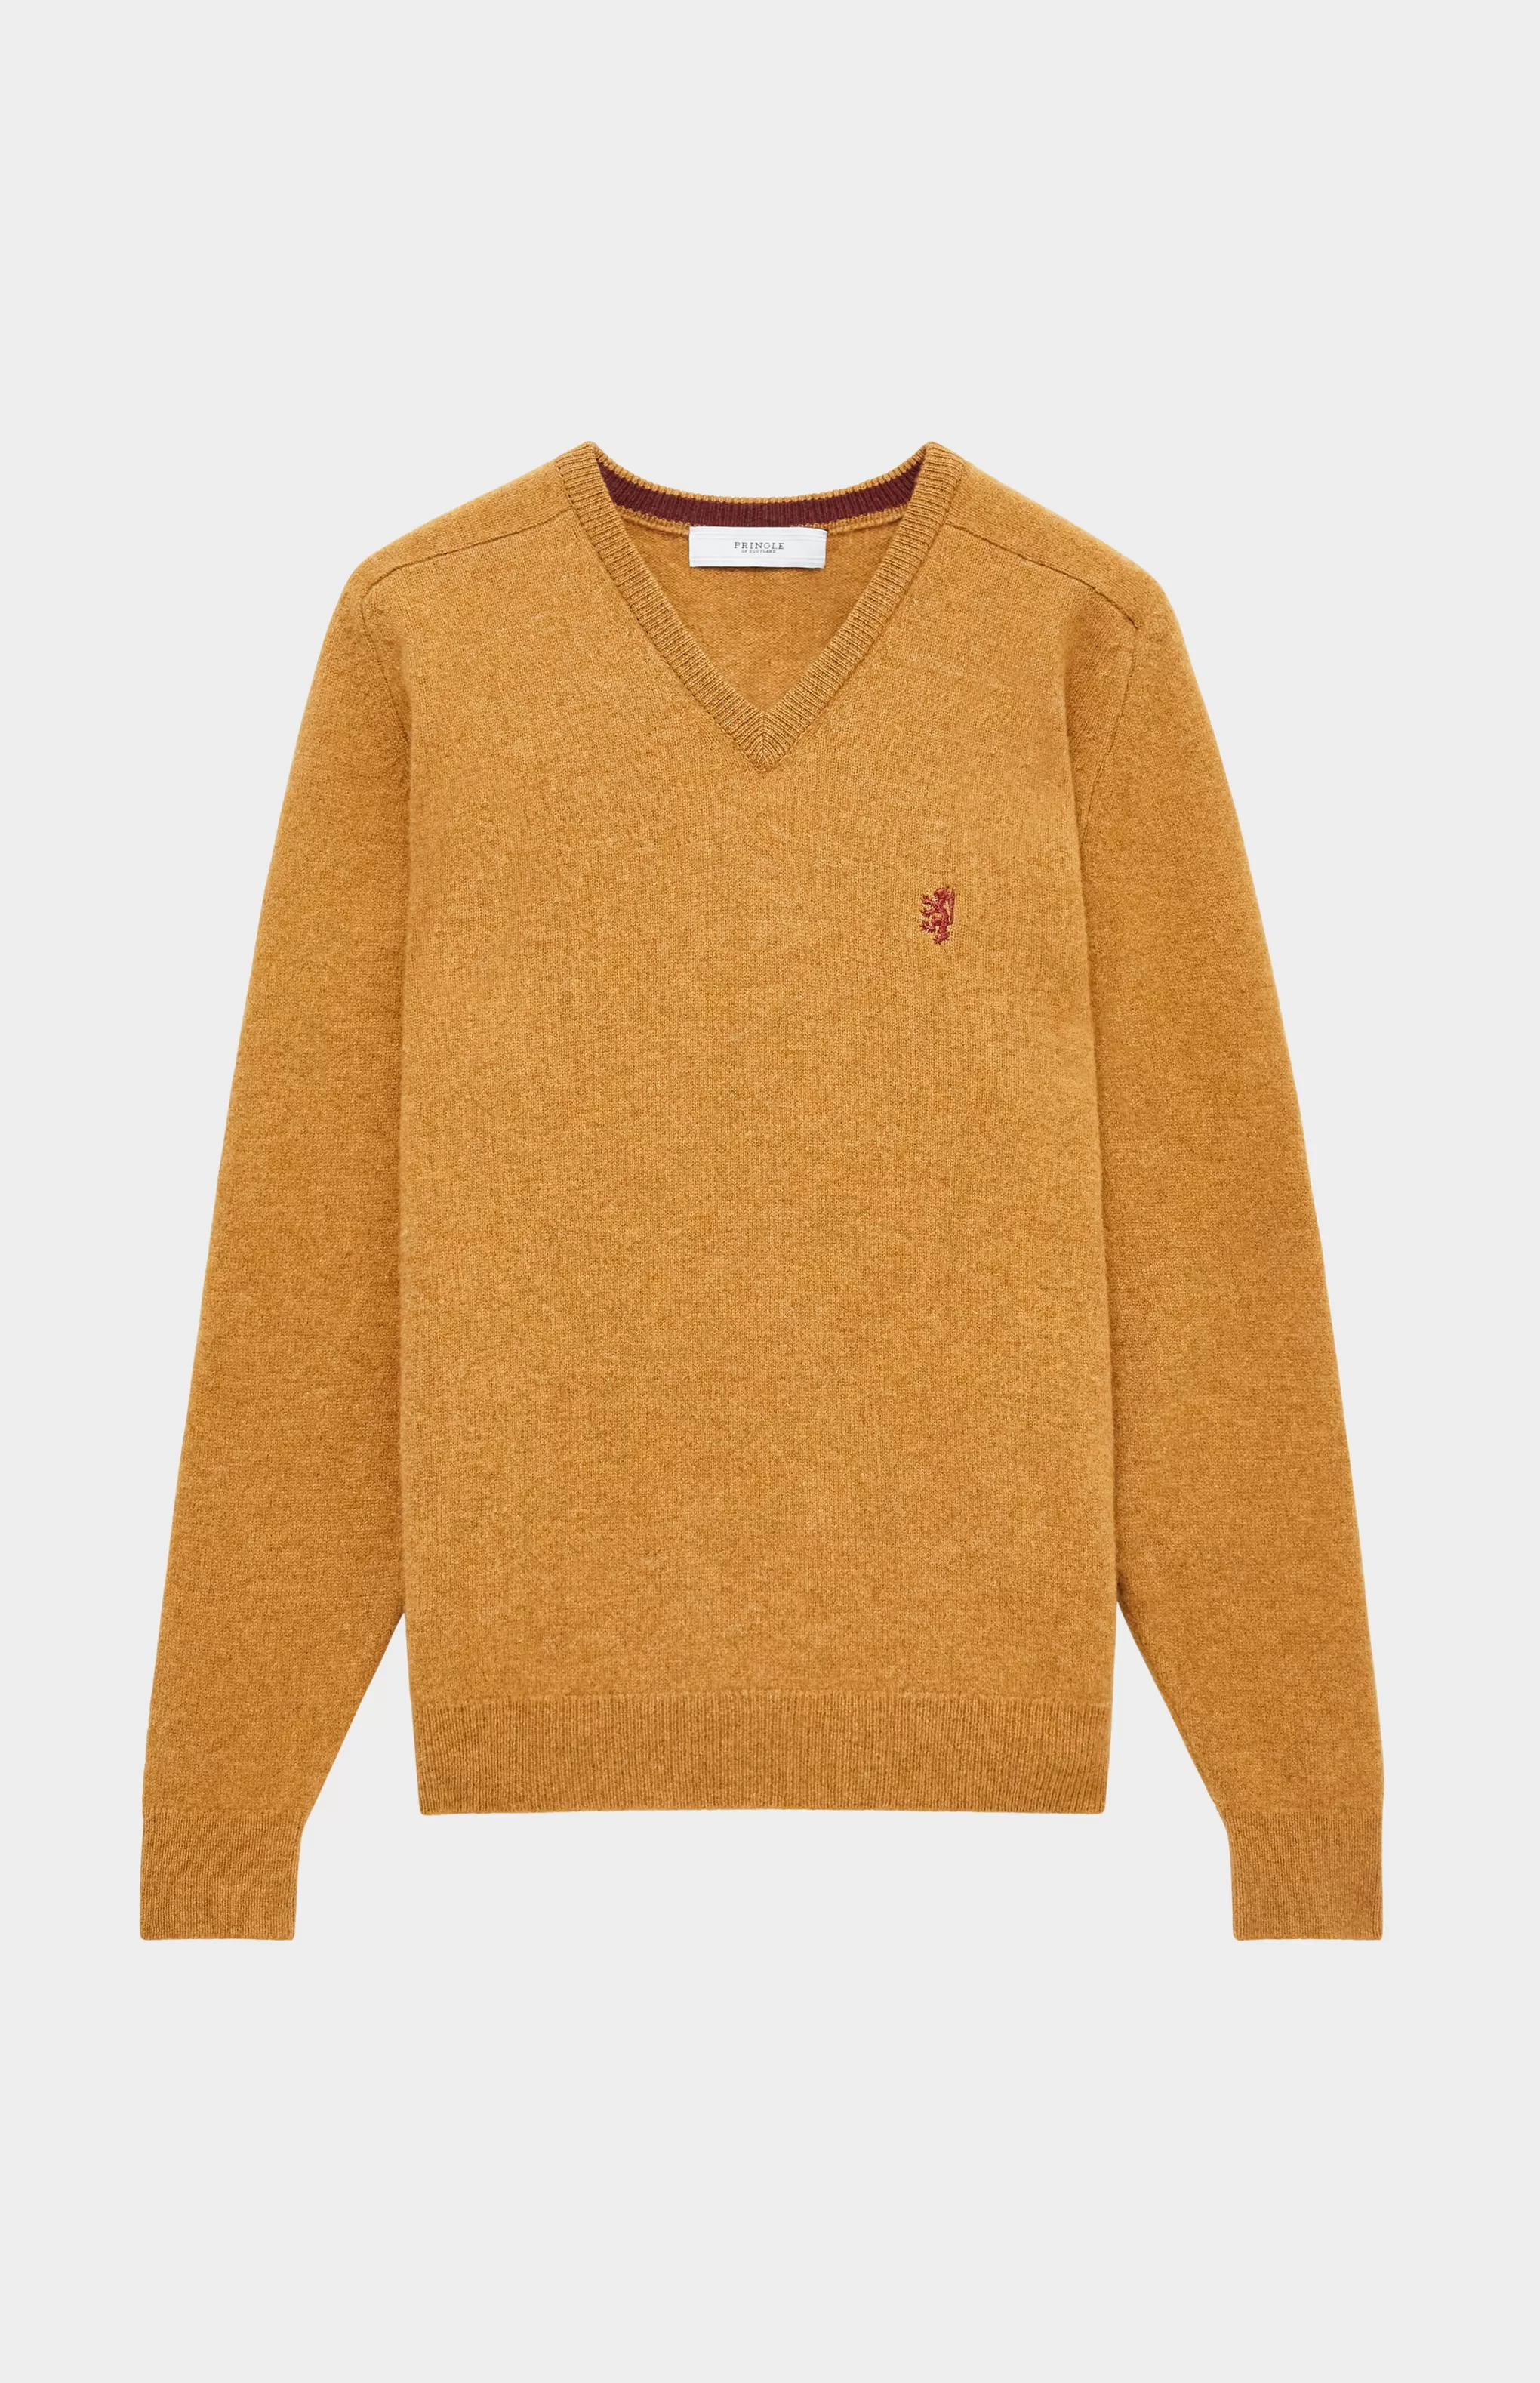 Cheap V Neck Lion Lambswool Jumper In Mustard Sand / Red Rust Men Best Sellers